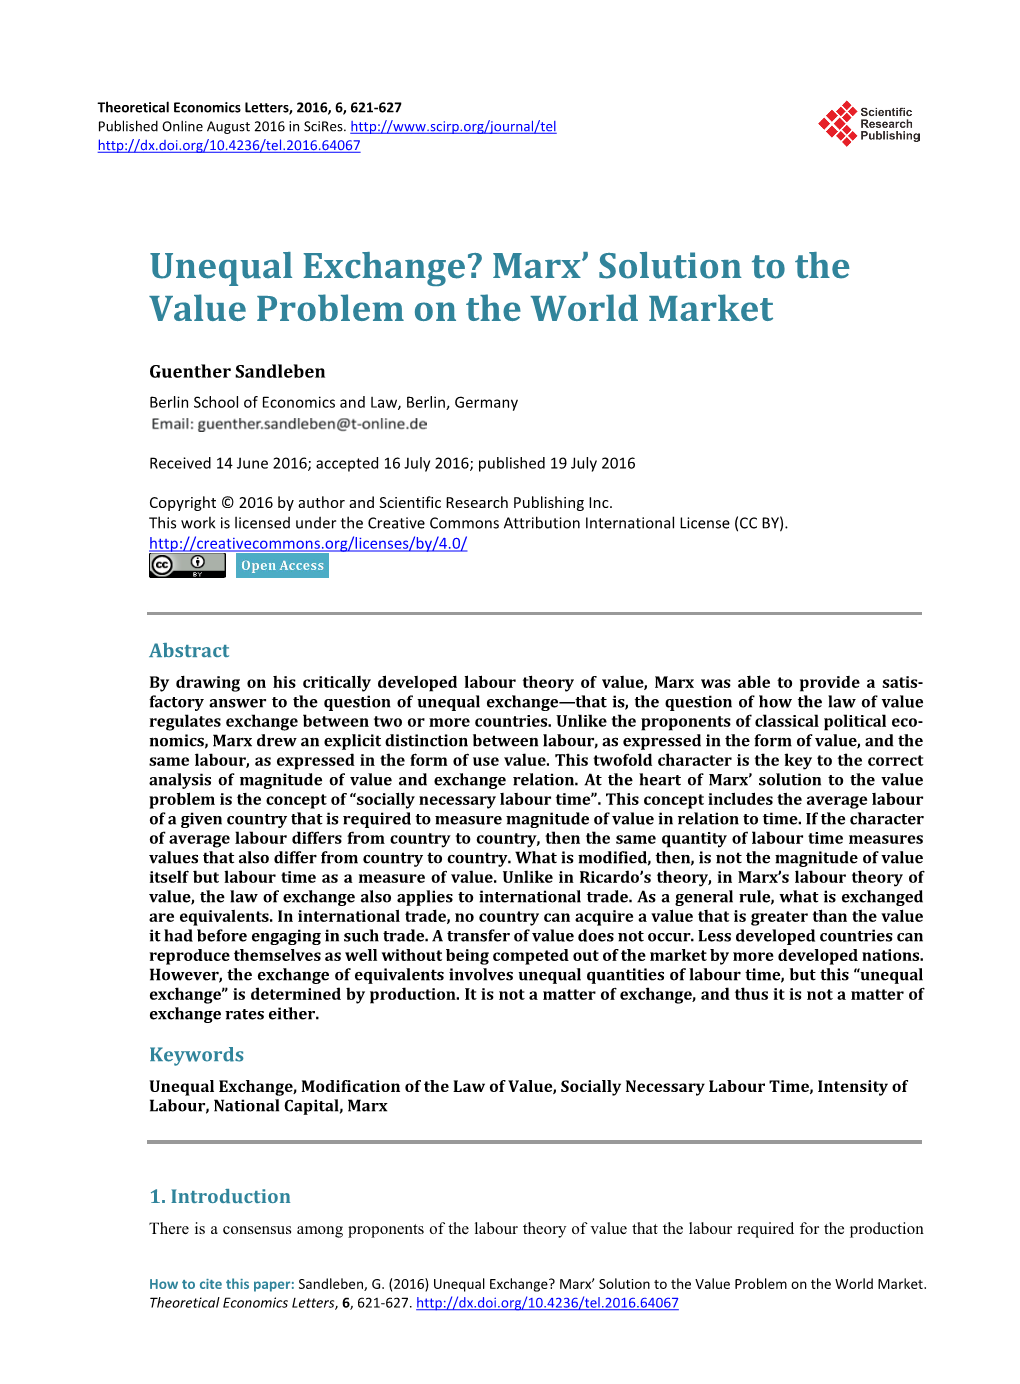 Unequal Exchange? Marx' Solution to the Value Problem on the World